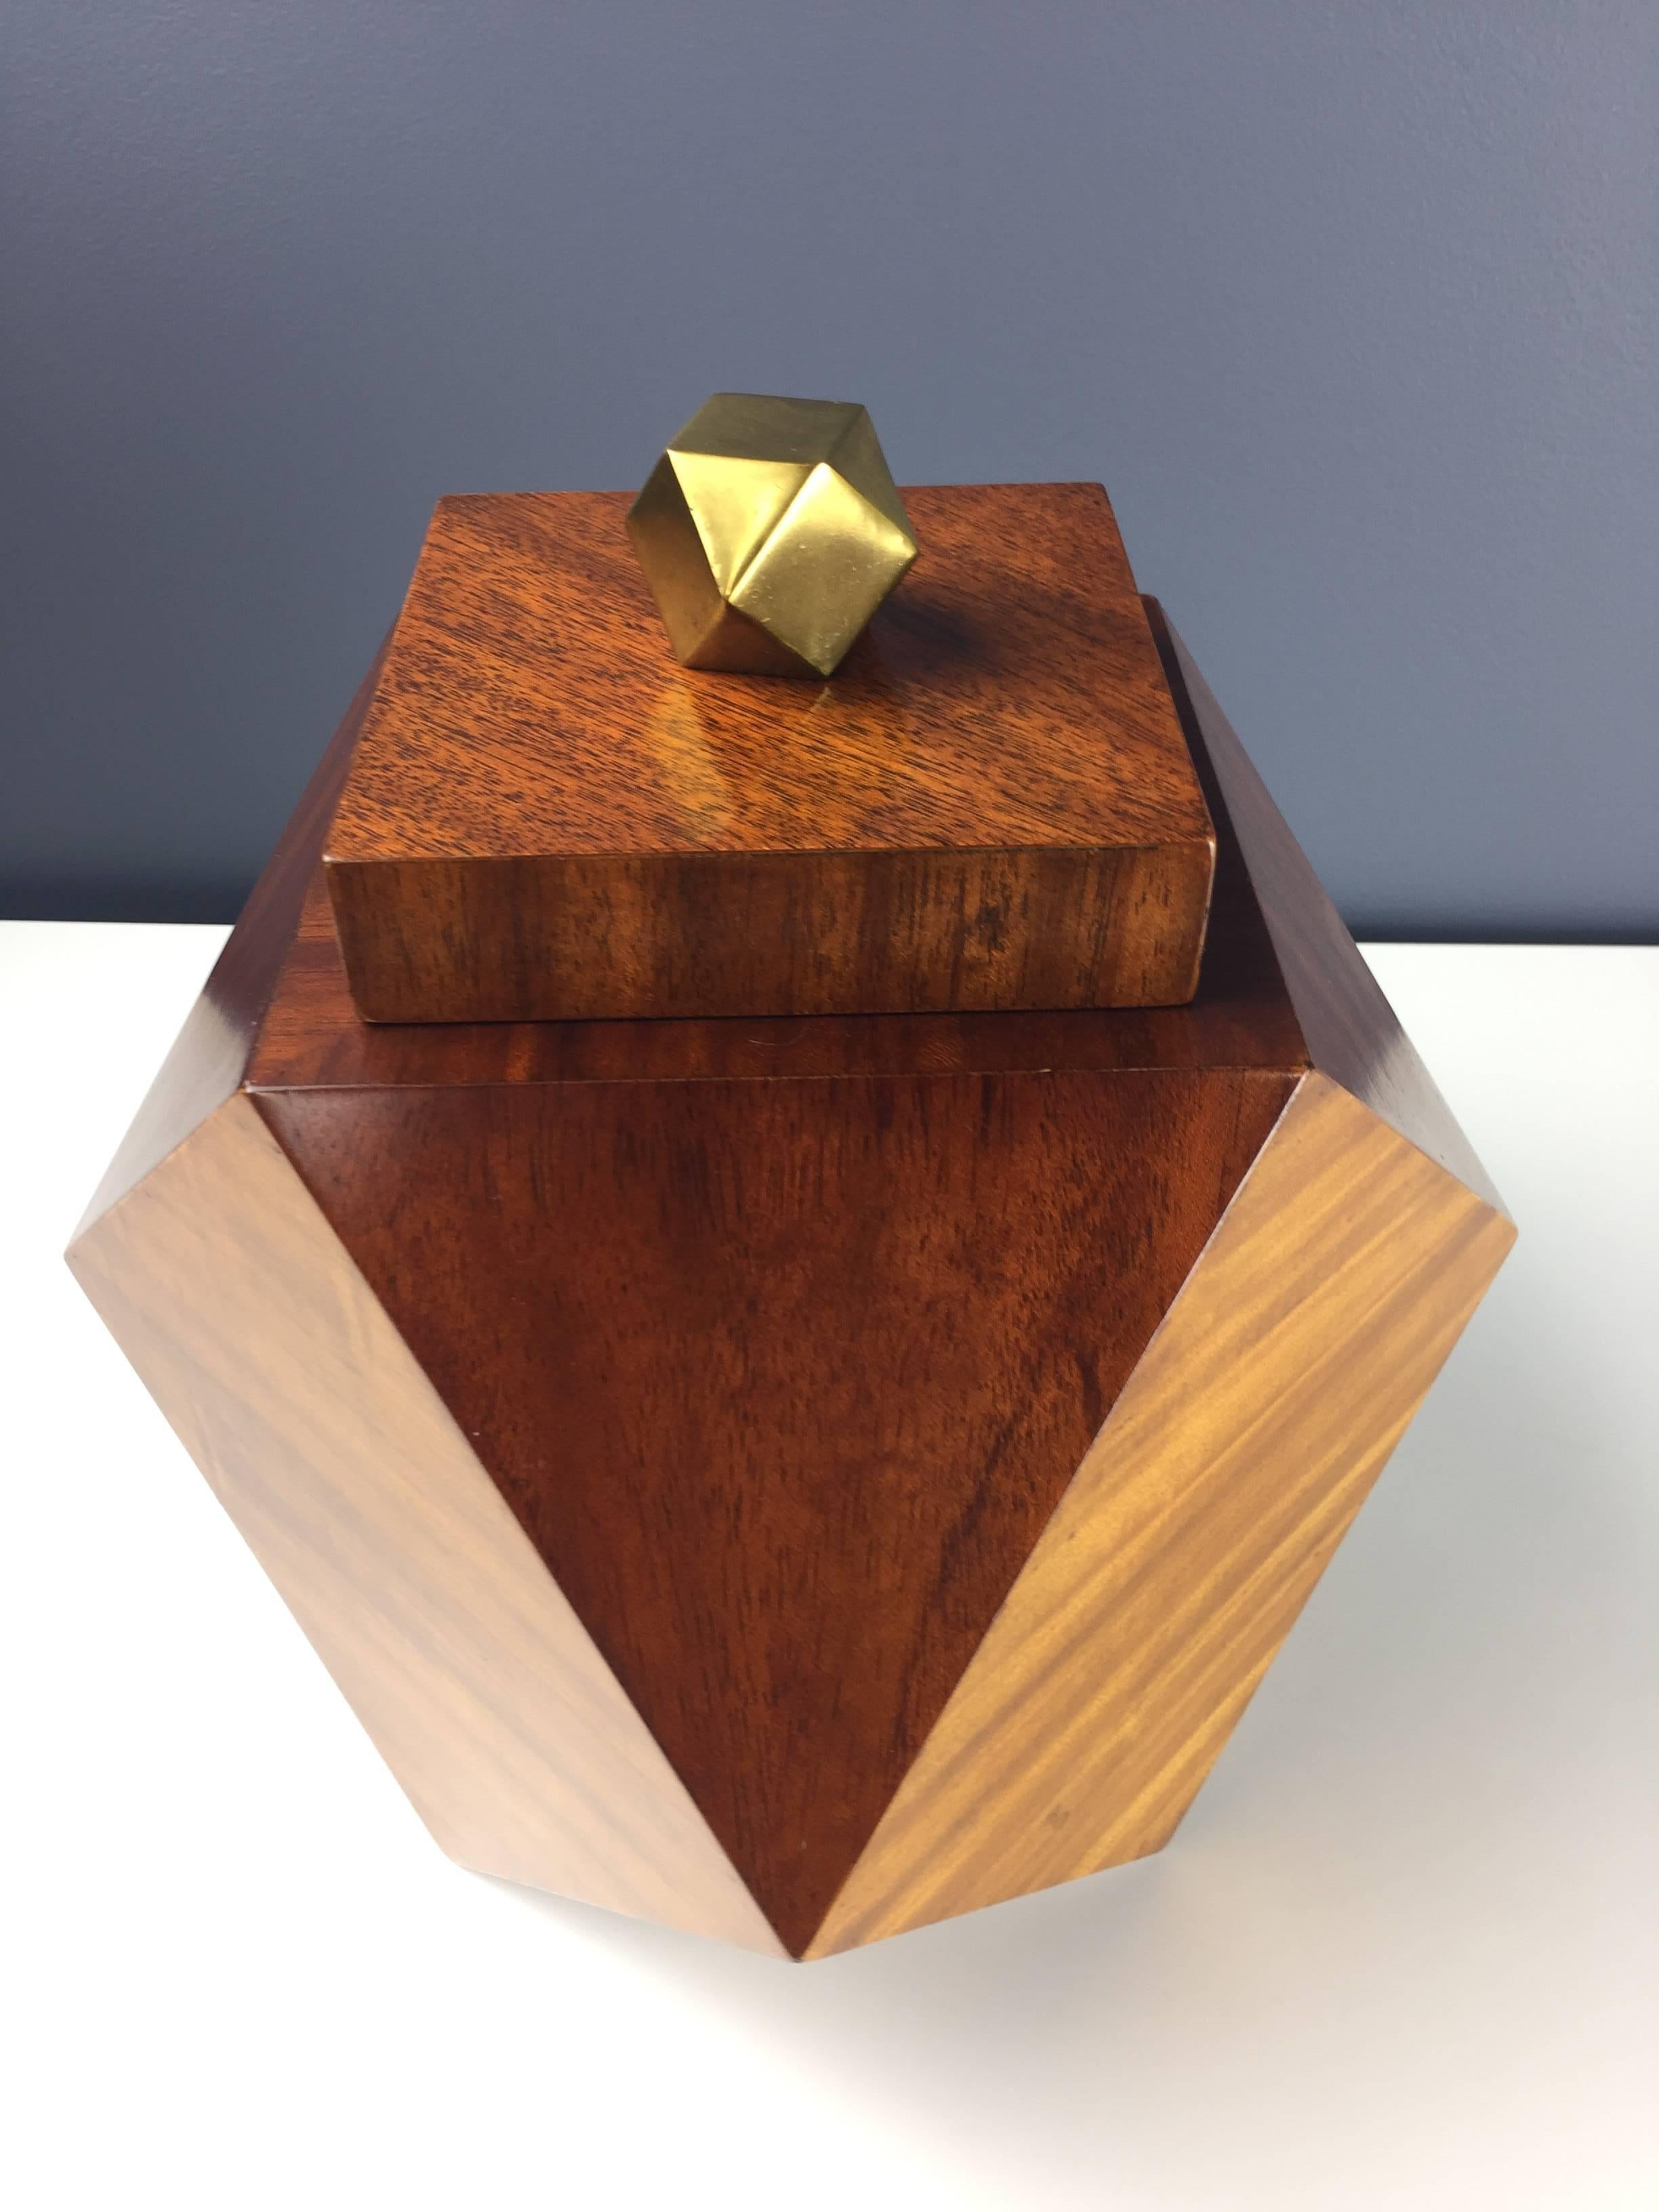 Beautiful octagonal mahogany lidded box with a handsome brass knob mirroring the box shape. This box is meticulously made with contrasting panels of mahogany.